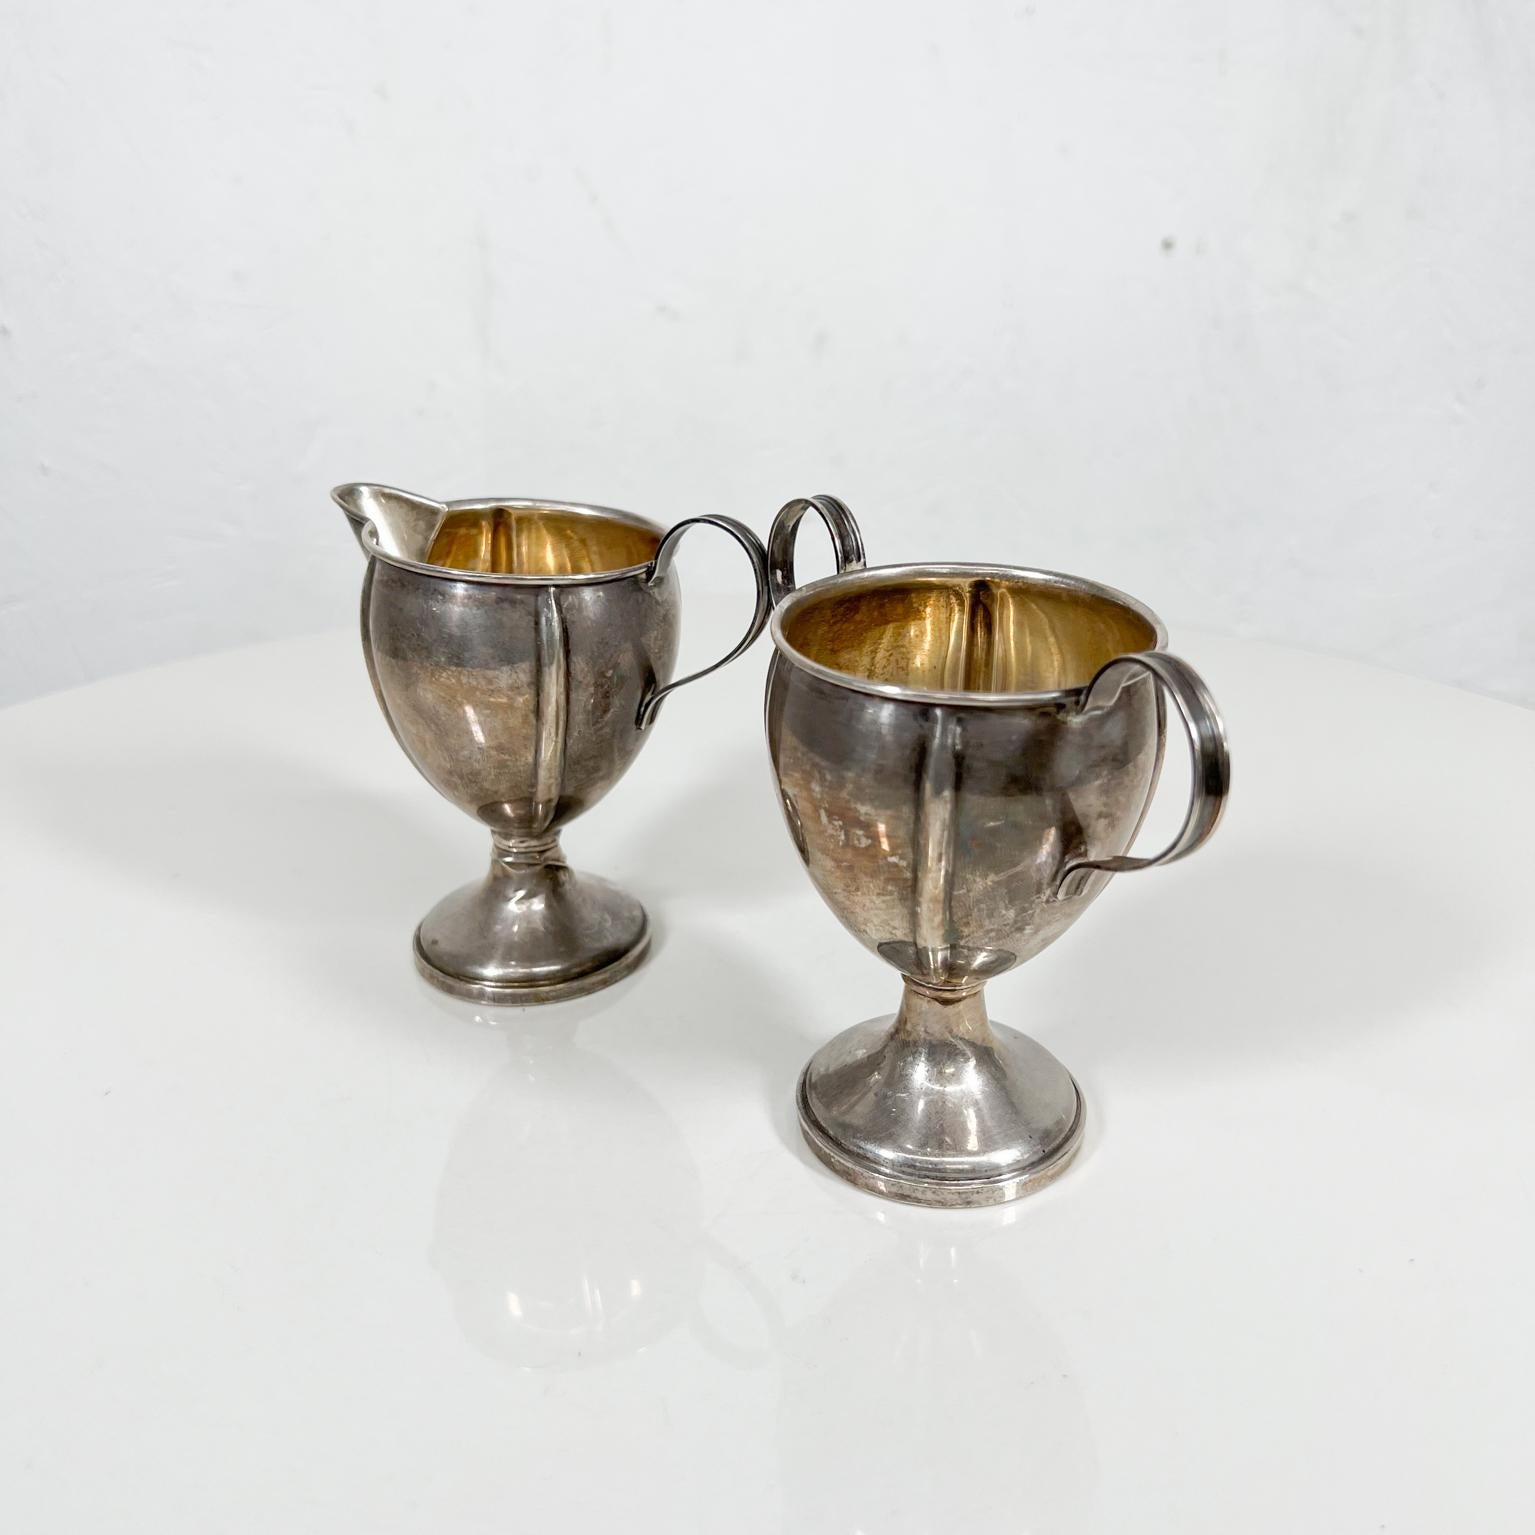 1940s Vintage M Fred Hirsch MFH elegant sterling silver sugar creamer set
See provided images
Stamped by maker
Measures: 4 tall x 2 diameter
Preowned original unrestored vintage condition.
 